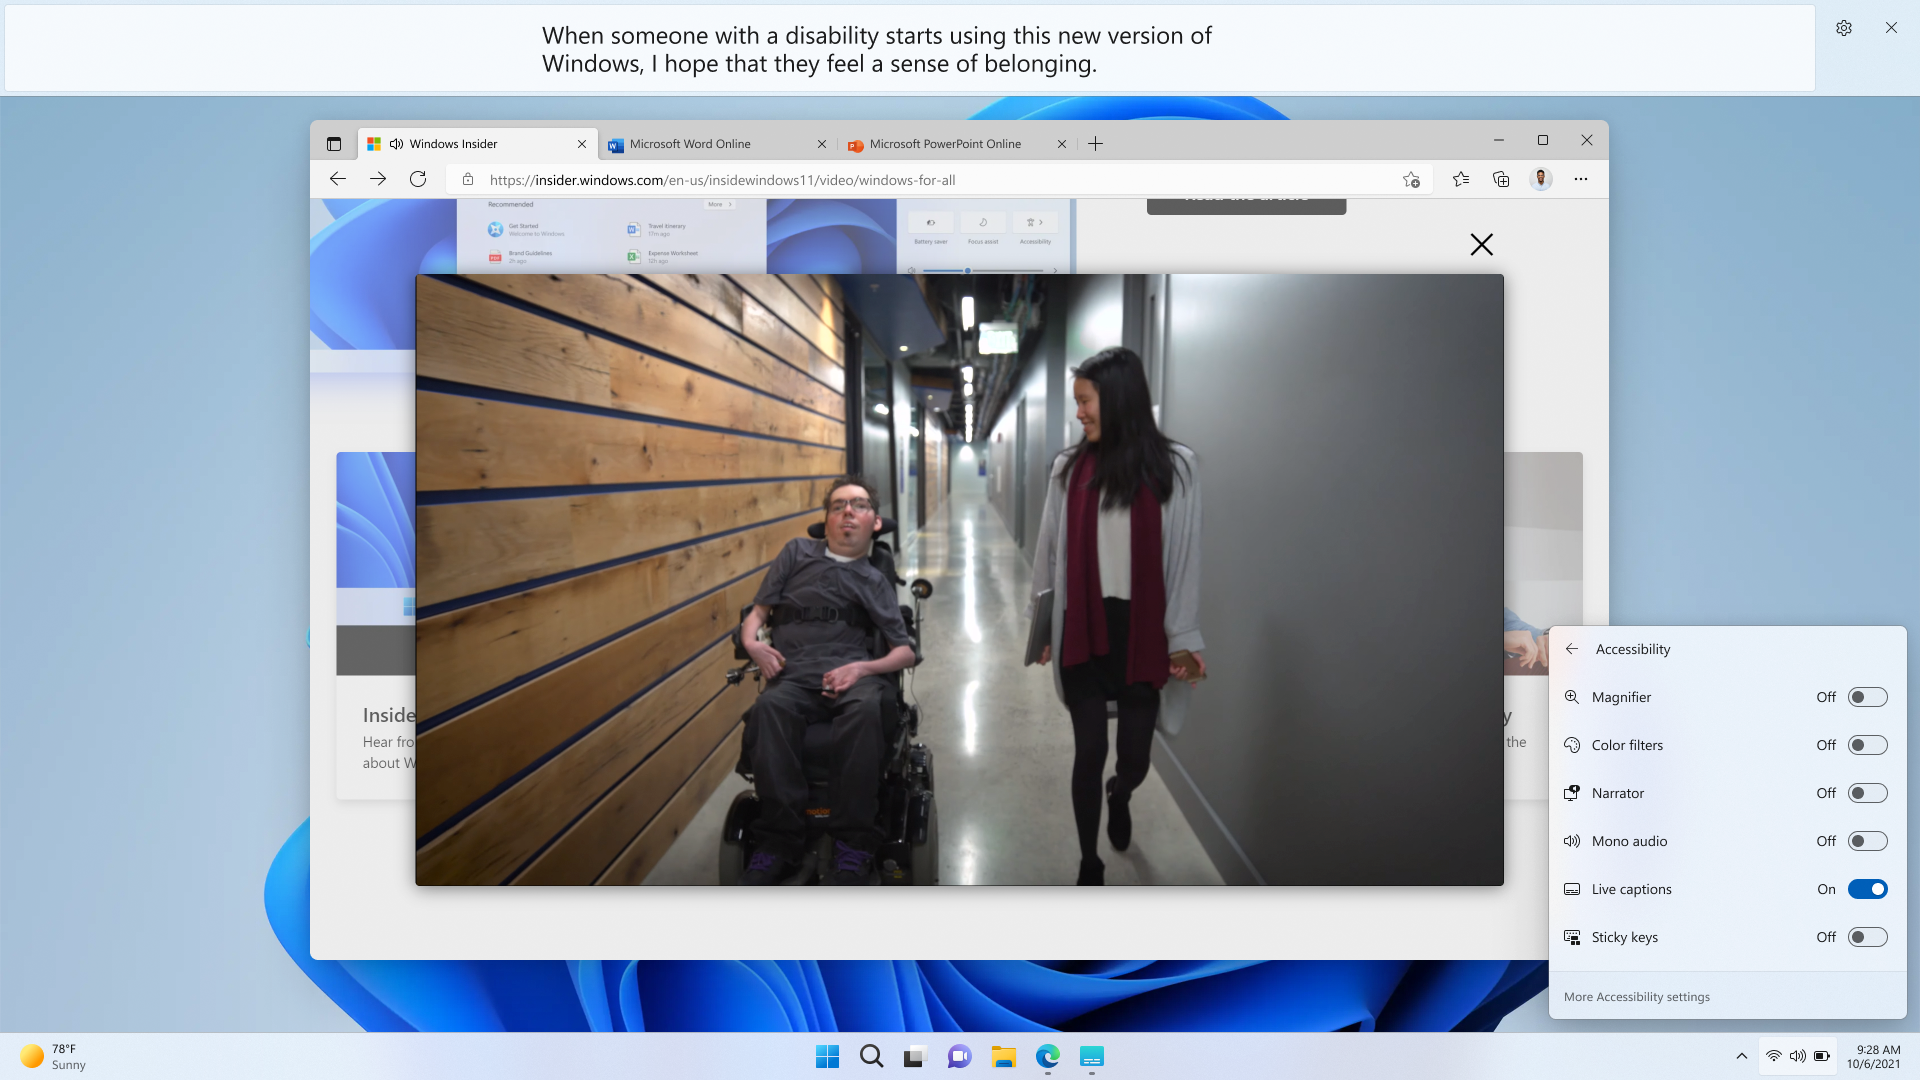 Live Captions in Windows 11. The captions appear at the top of the screen, above the video.